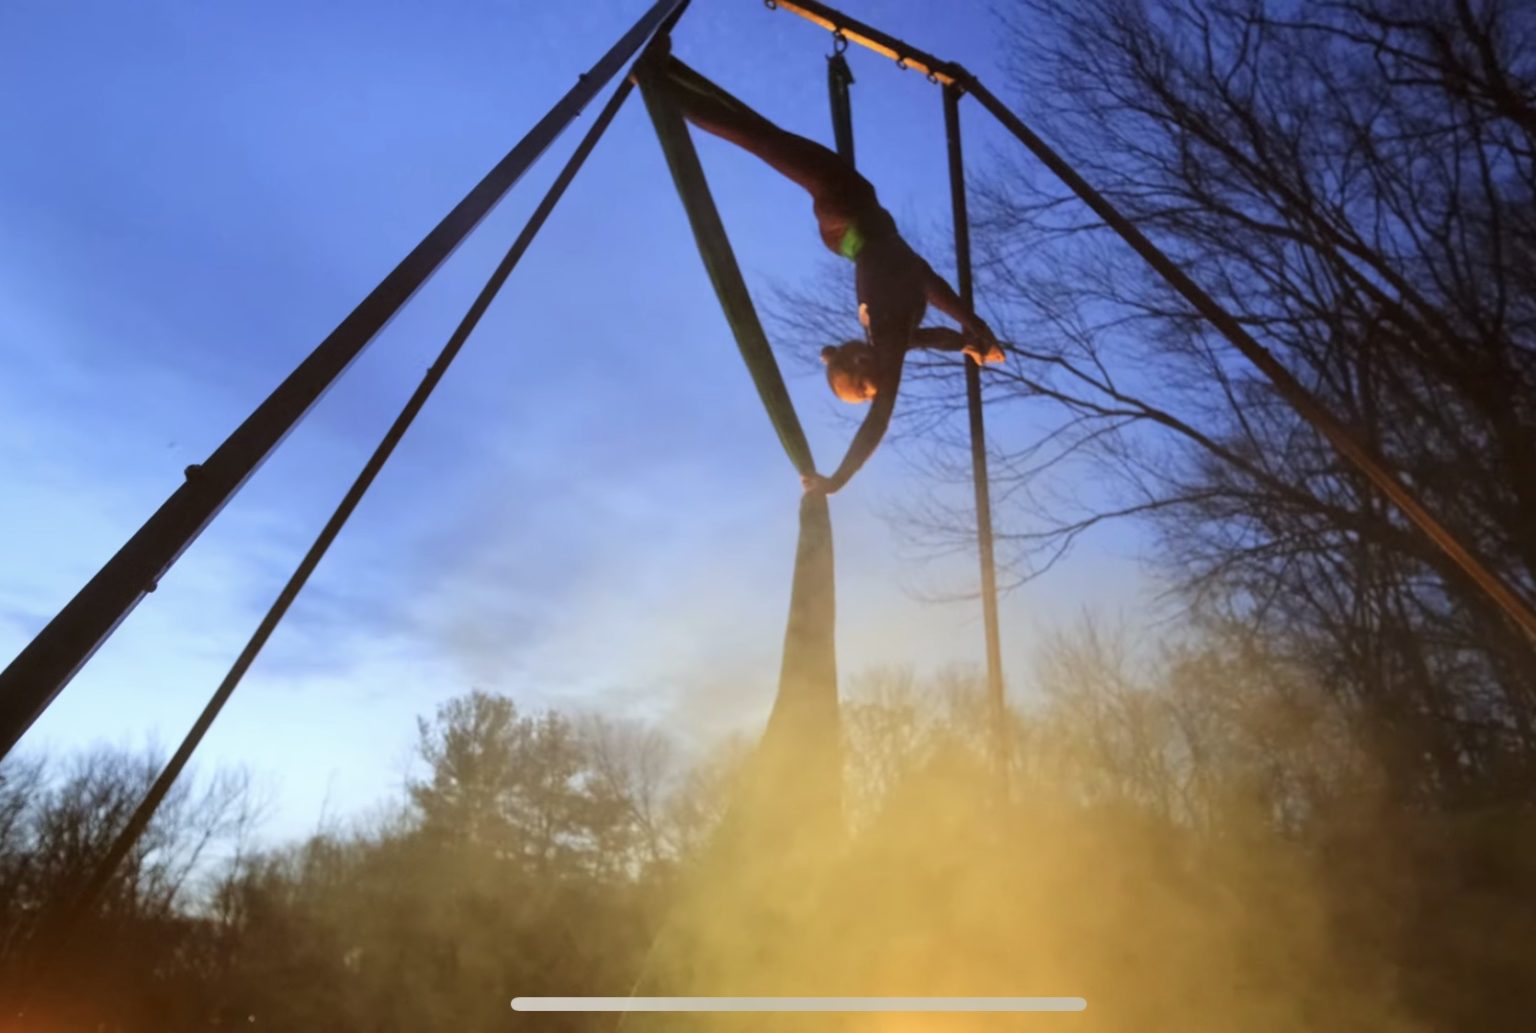 Aerialist performs she splits upside down on an aerial fabric